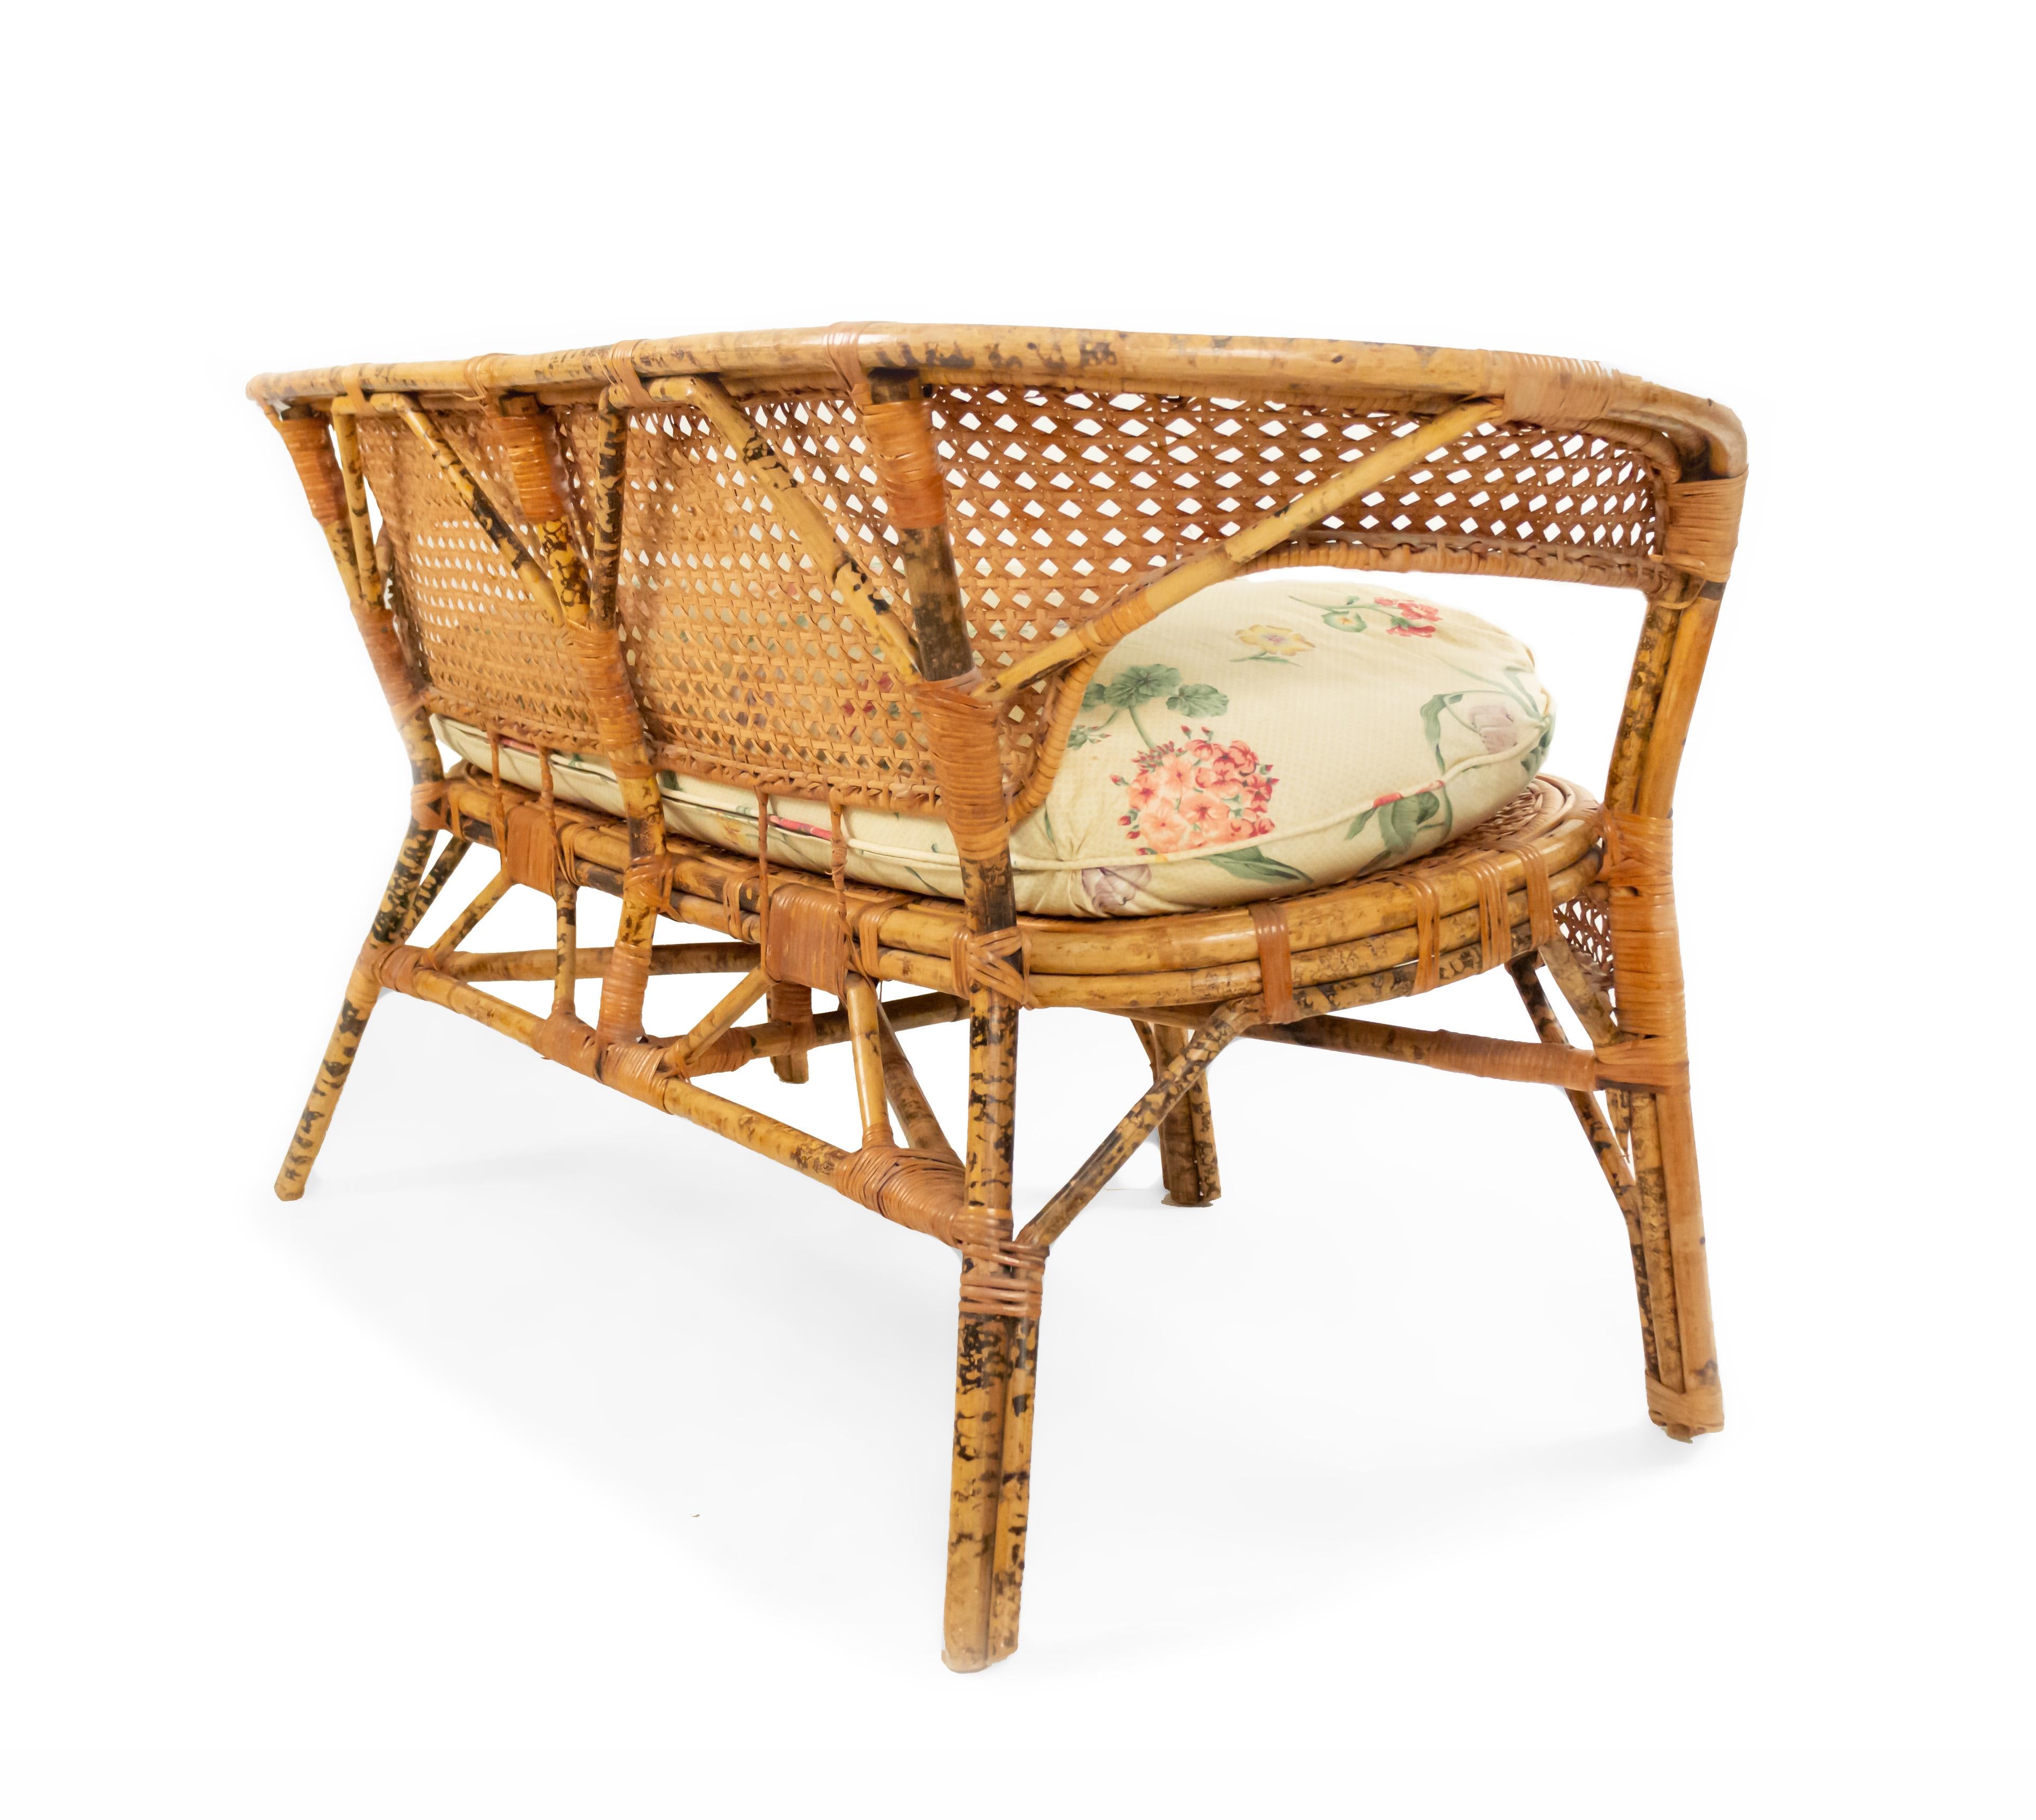 Midcentury Wicker Love Seat with Floral Upholstery For Sale 1